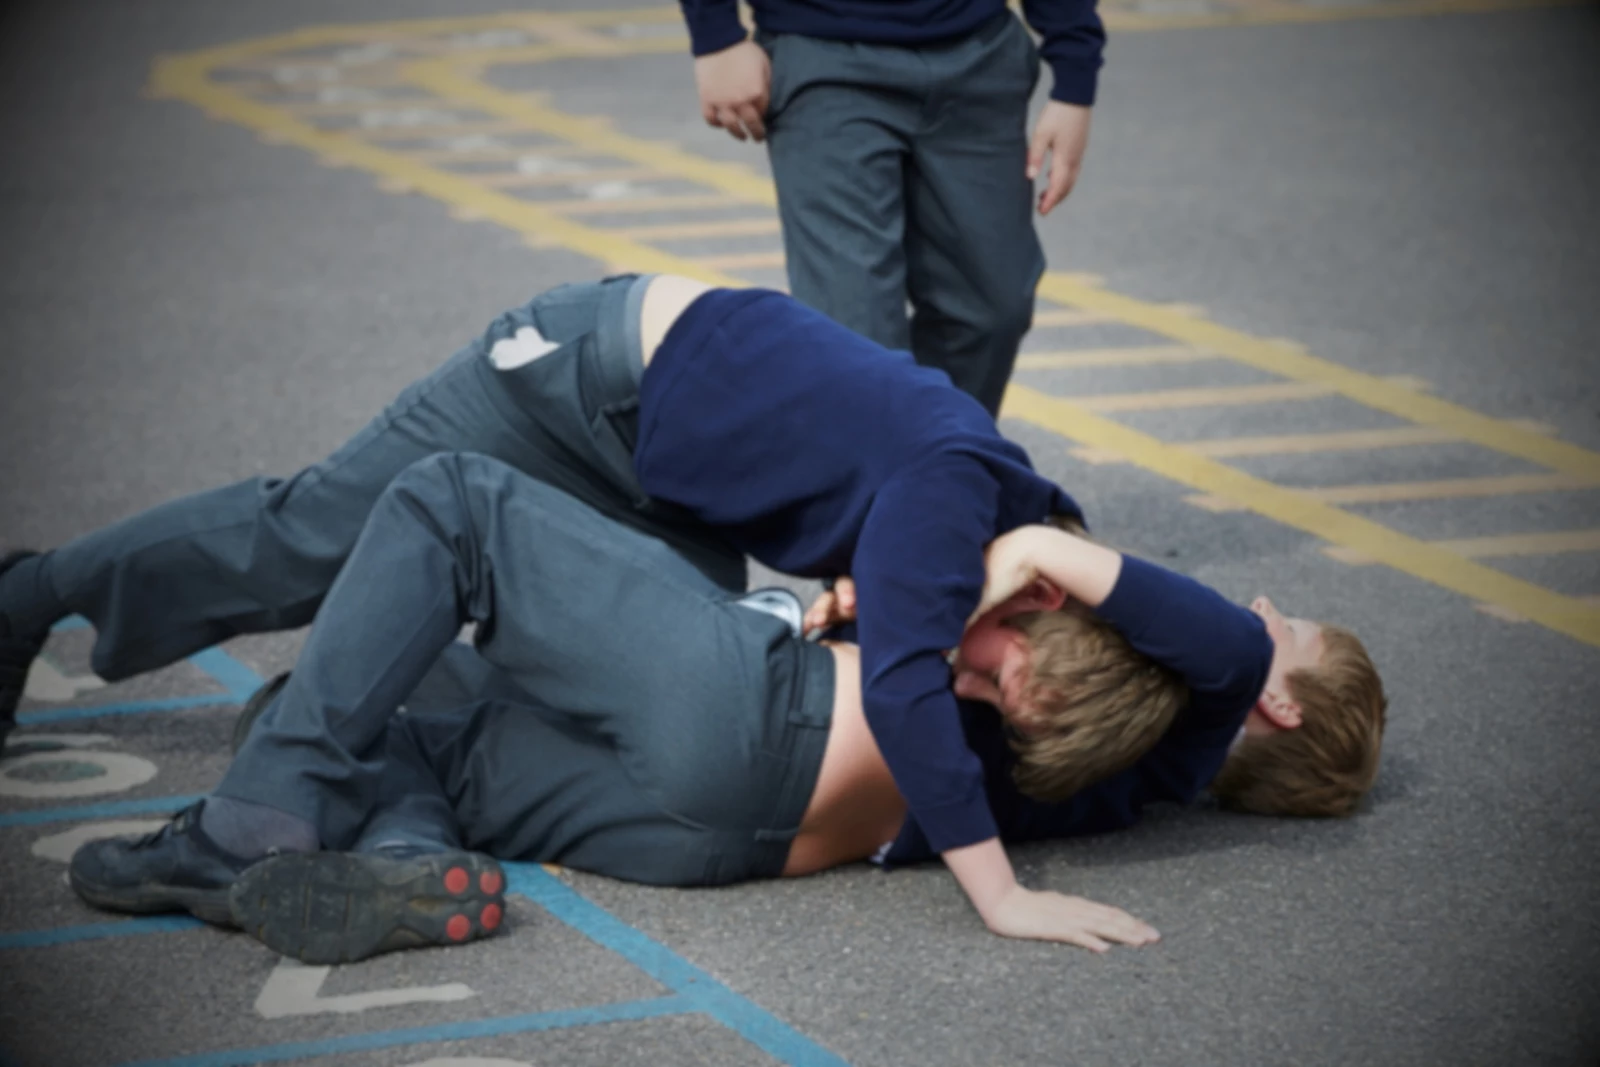 30 schools in New Jersey where your child is likely to be the victim of violence - Photo: Canva